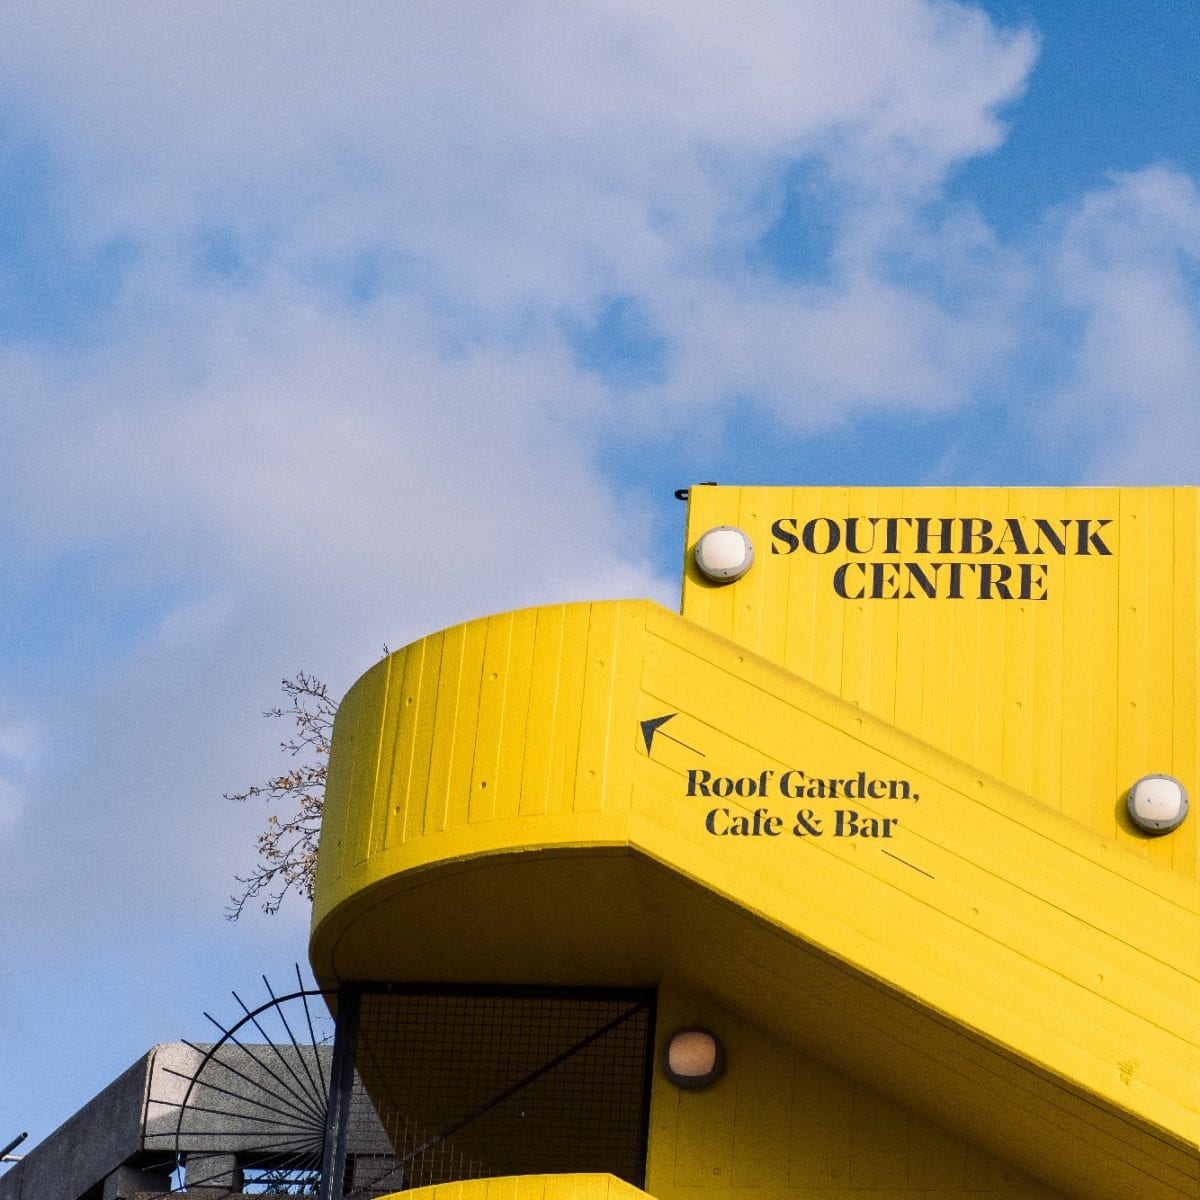 A different view of the Soutbank Centre showing the yellow staircase of the famous building